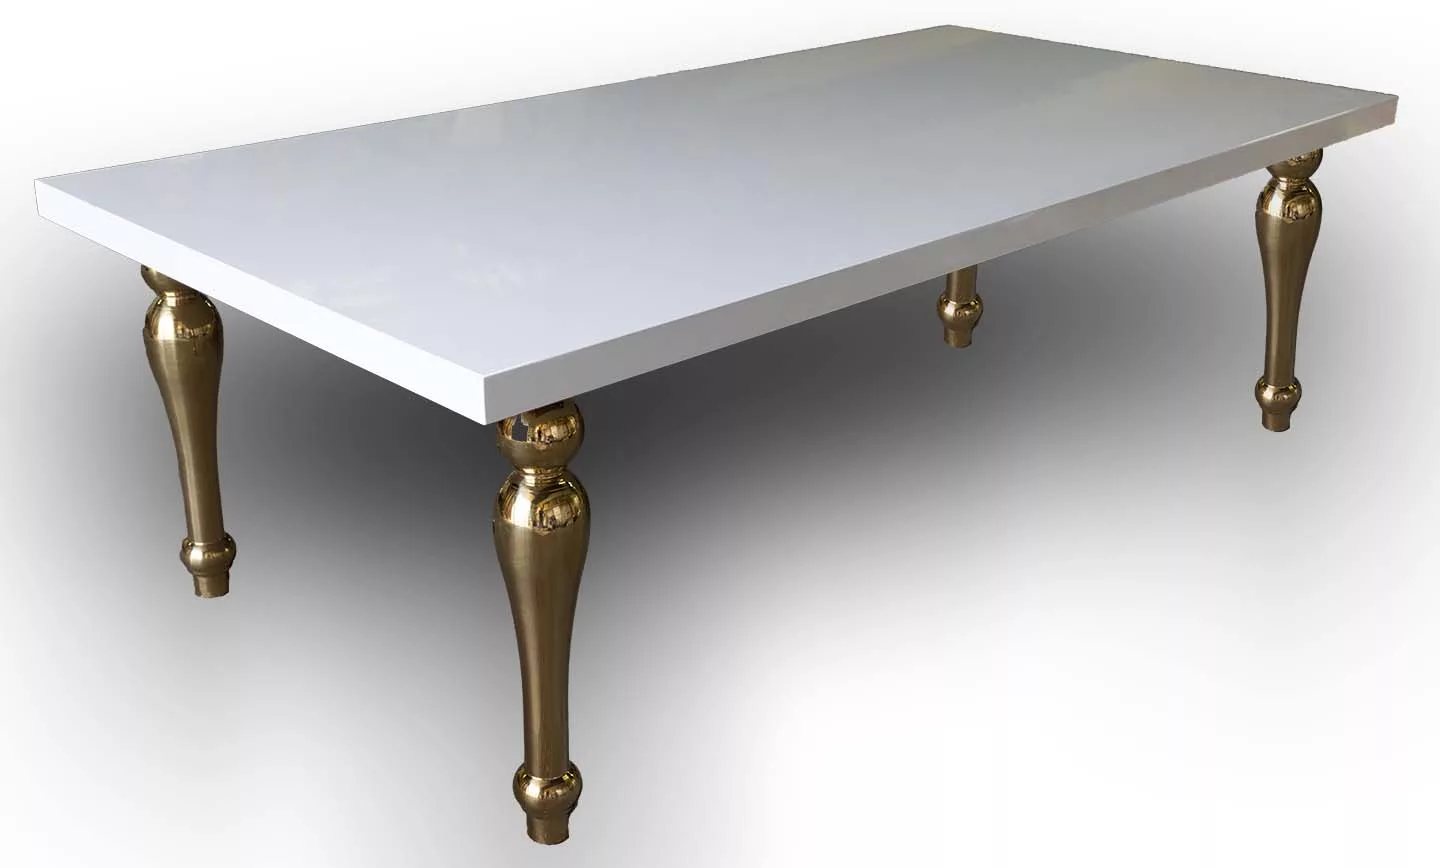 Class Event Rentals Athena Table in white acrylic, rectangular with gold legs, shown at angle